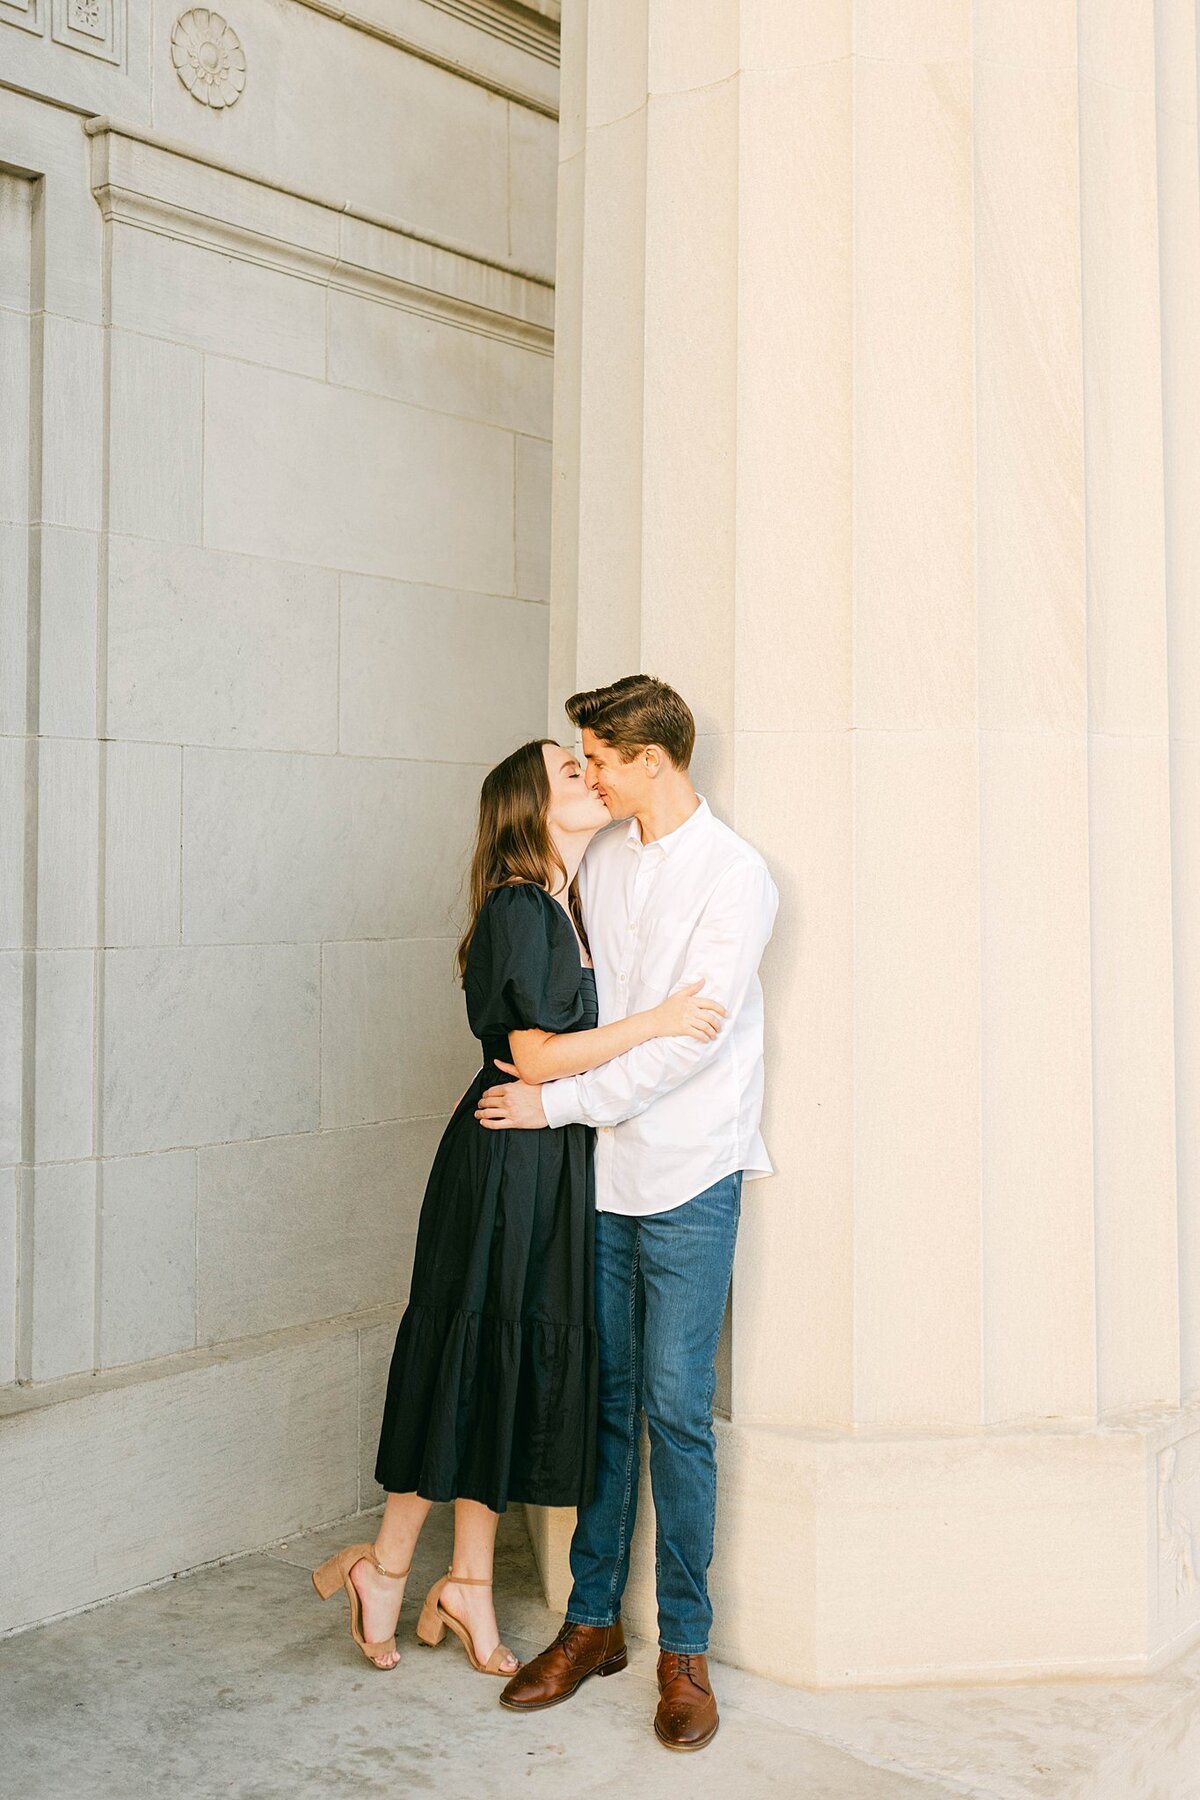 Downtown Indianapolis Engagement Photos Alison Mae Photography_7140